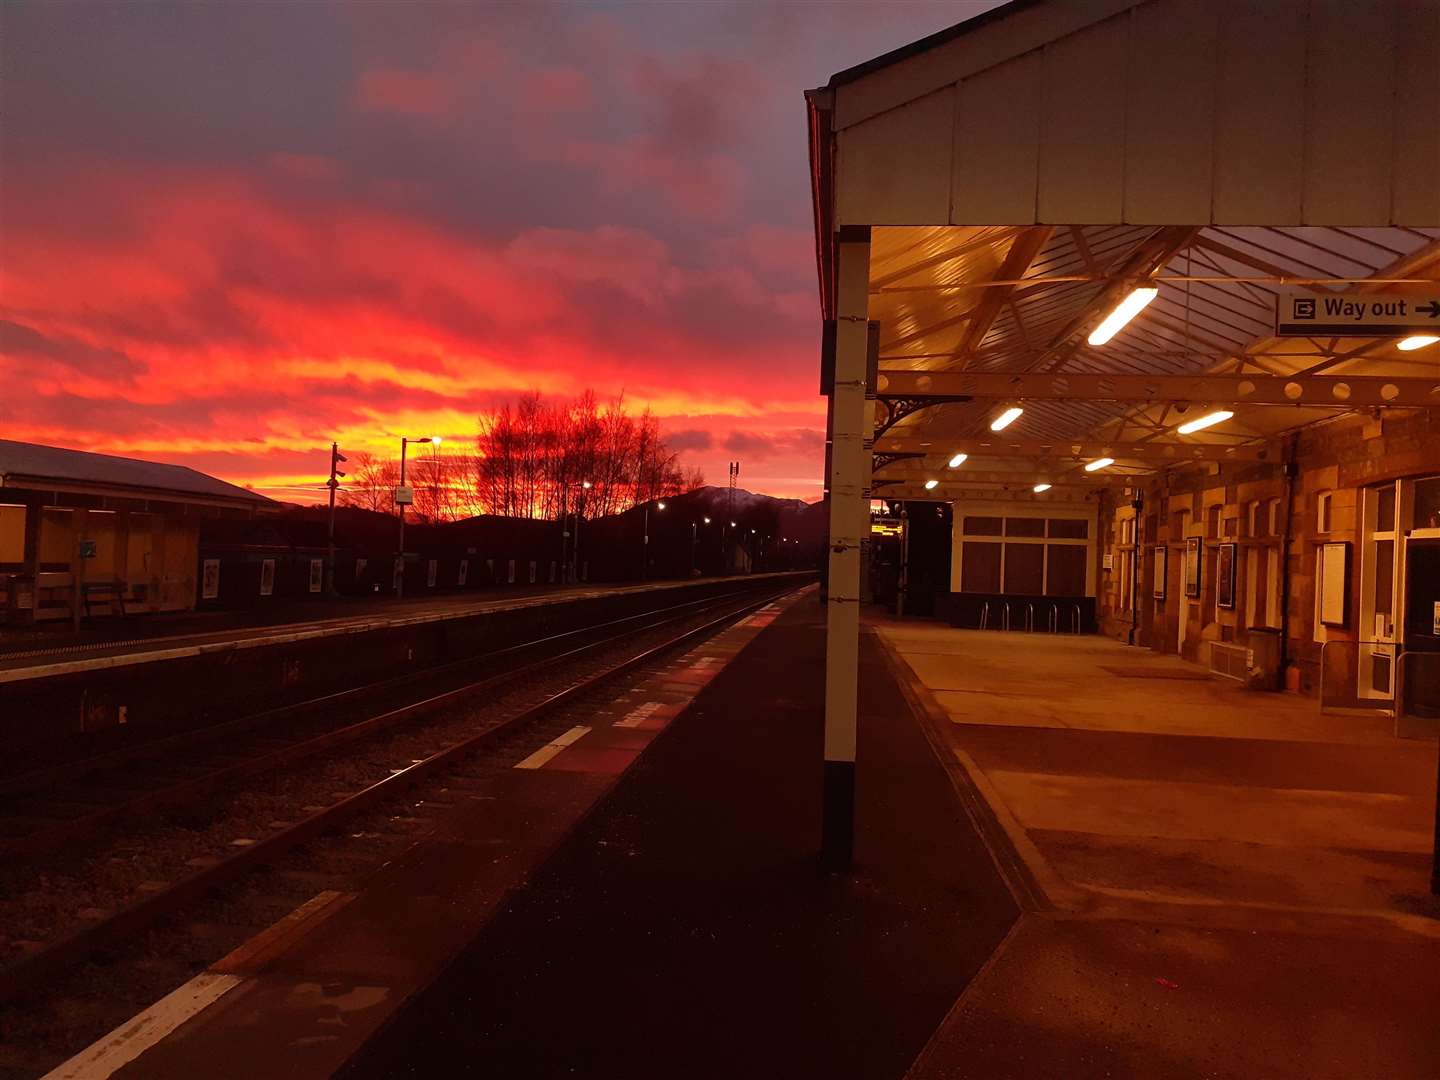 Kingussie Railway Station at the end of the day